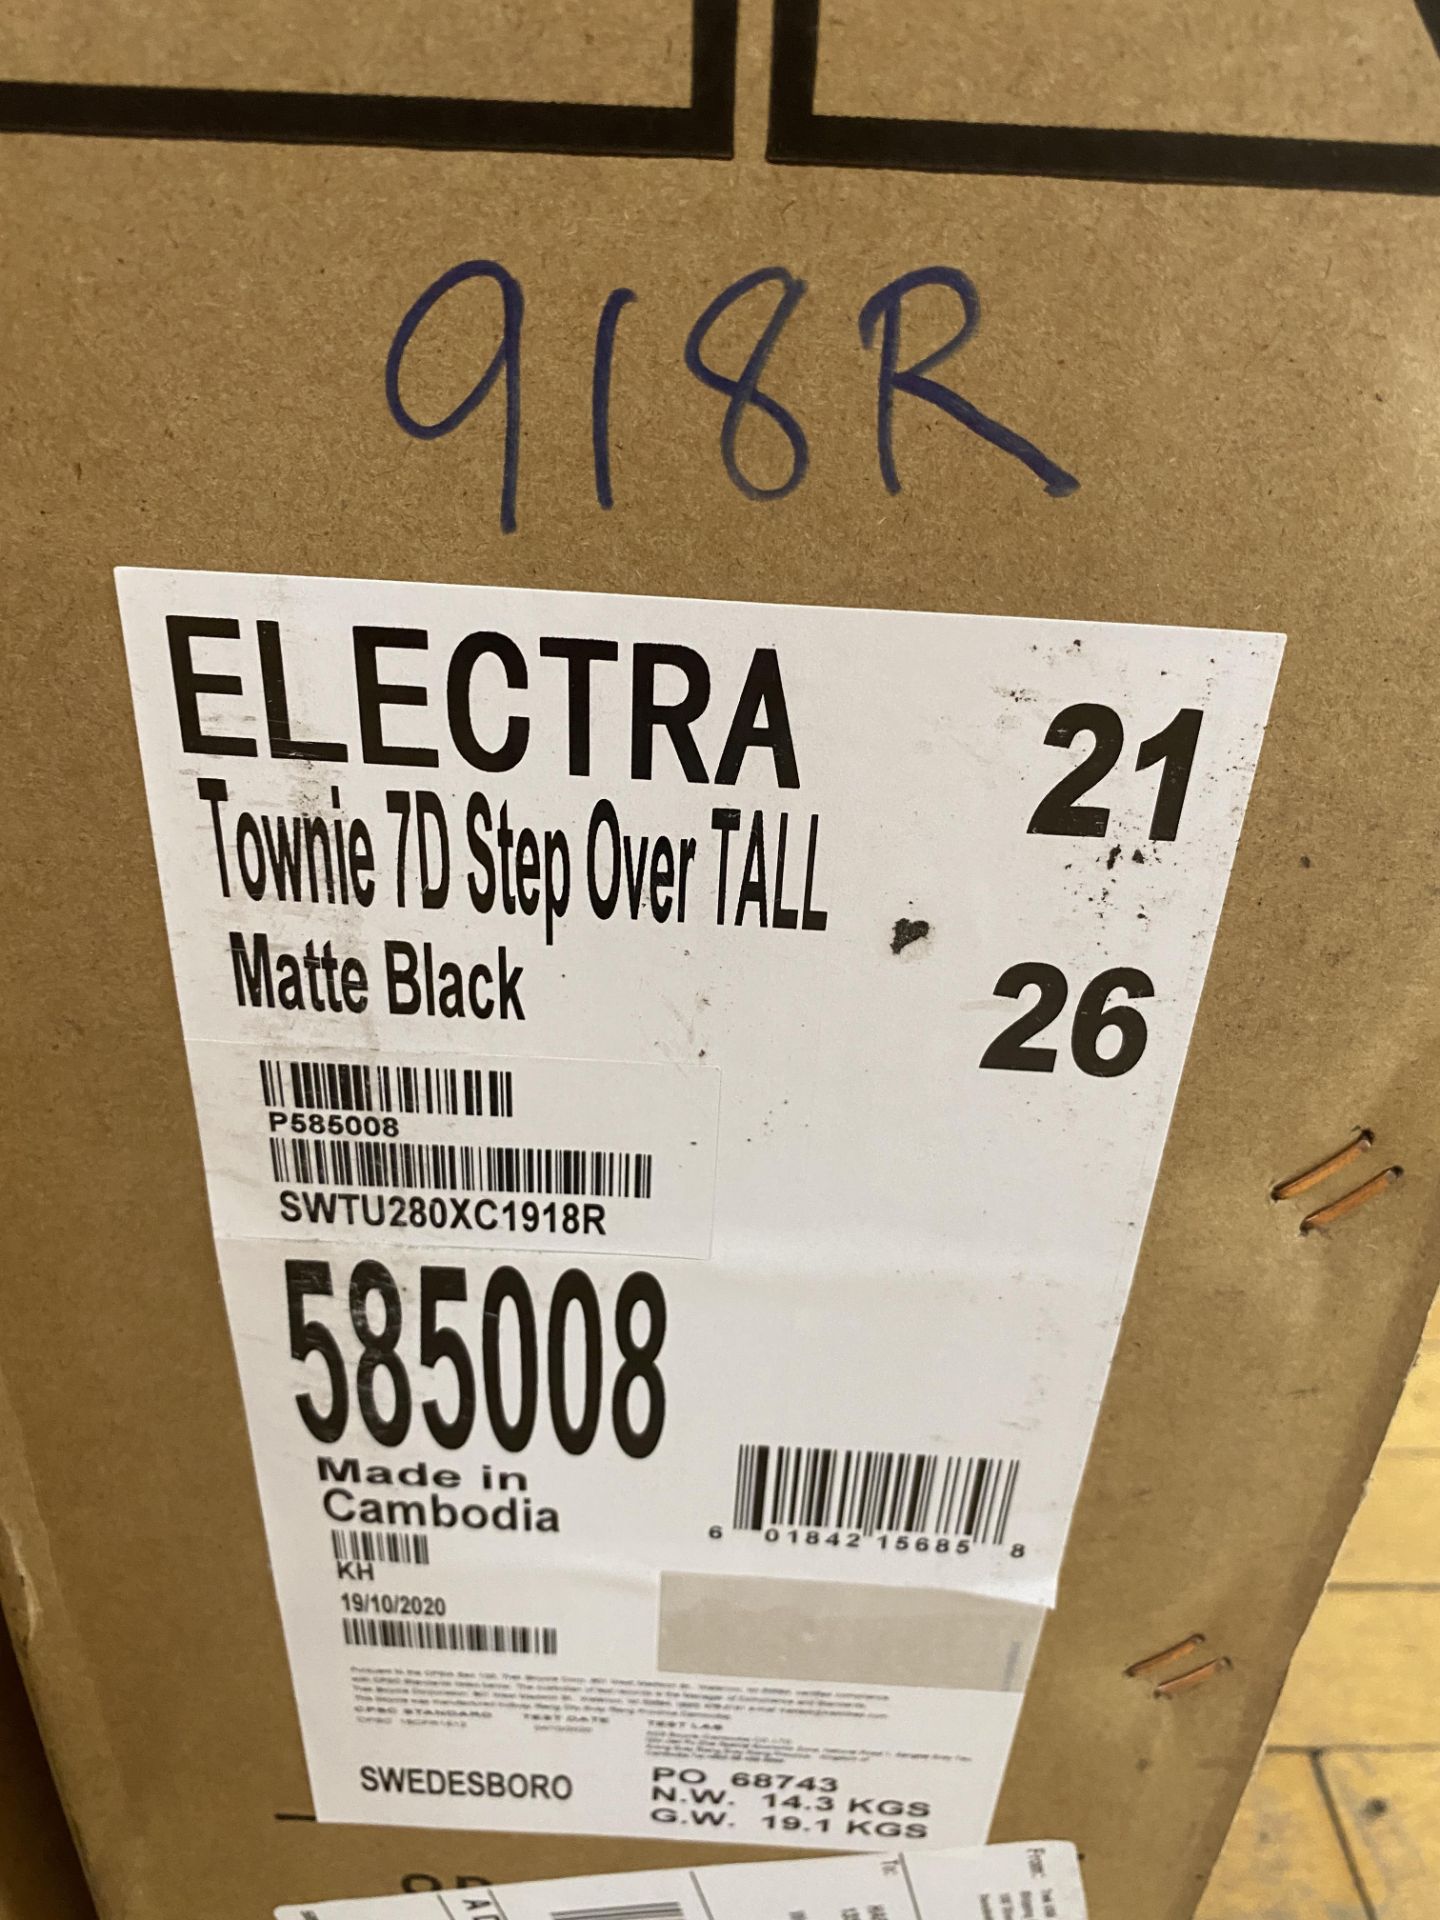 Electra Townie 7D Stepover Tall 26" $580 Retail